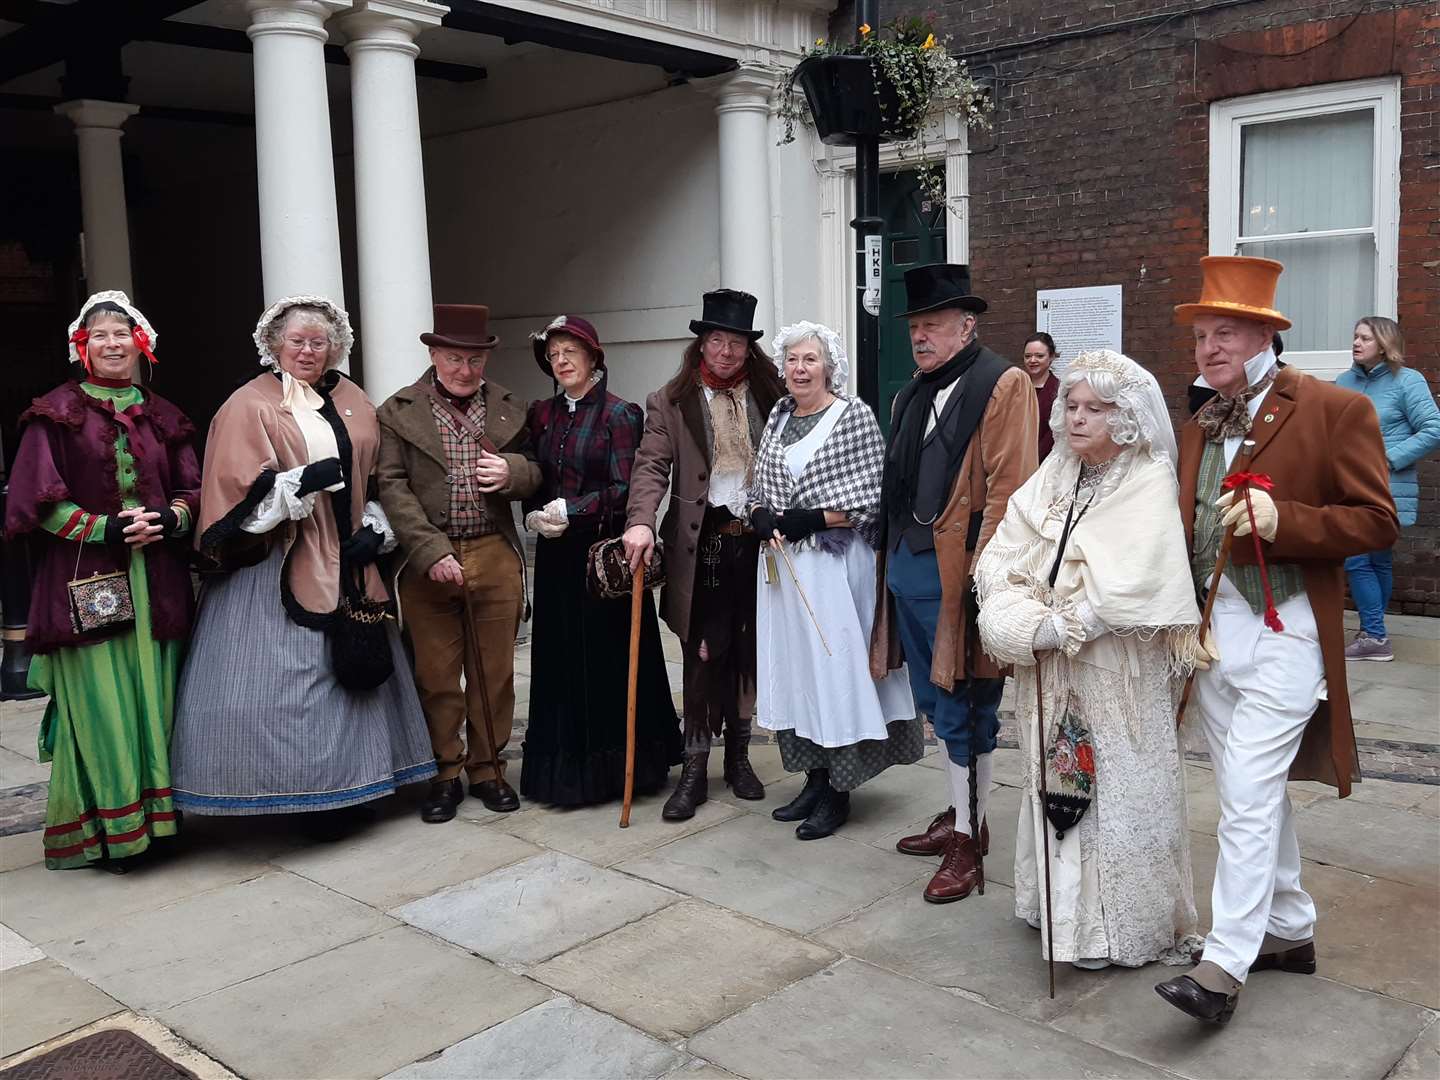 The Duchess of Cornwall was greeted by costumed characters from The Rochester and Chatham Dickens Fellowship during a visit to the Guildhall museum.